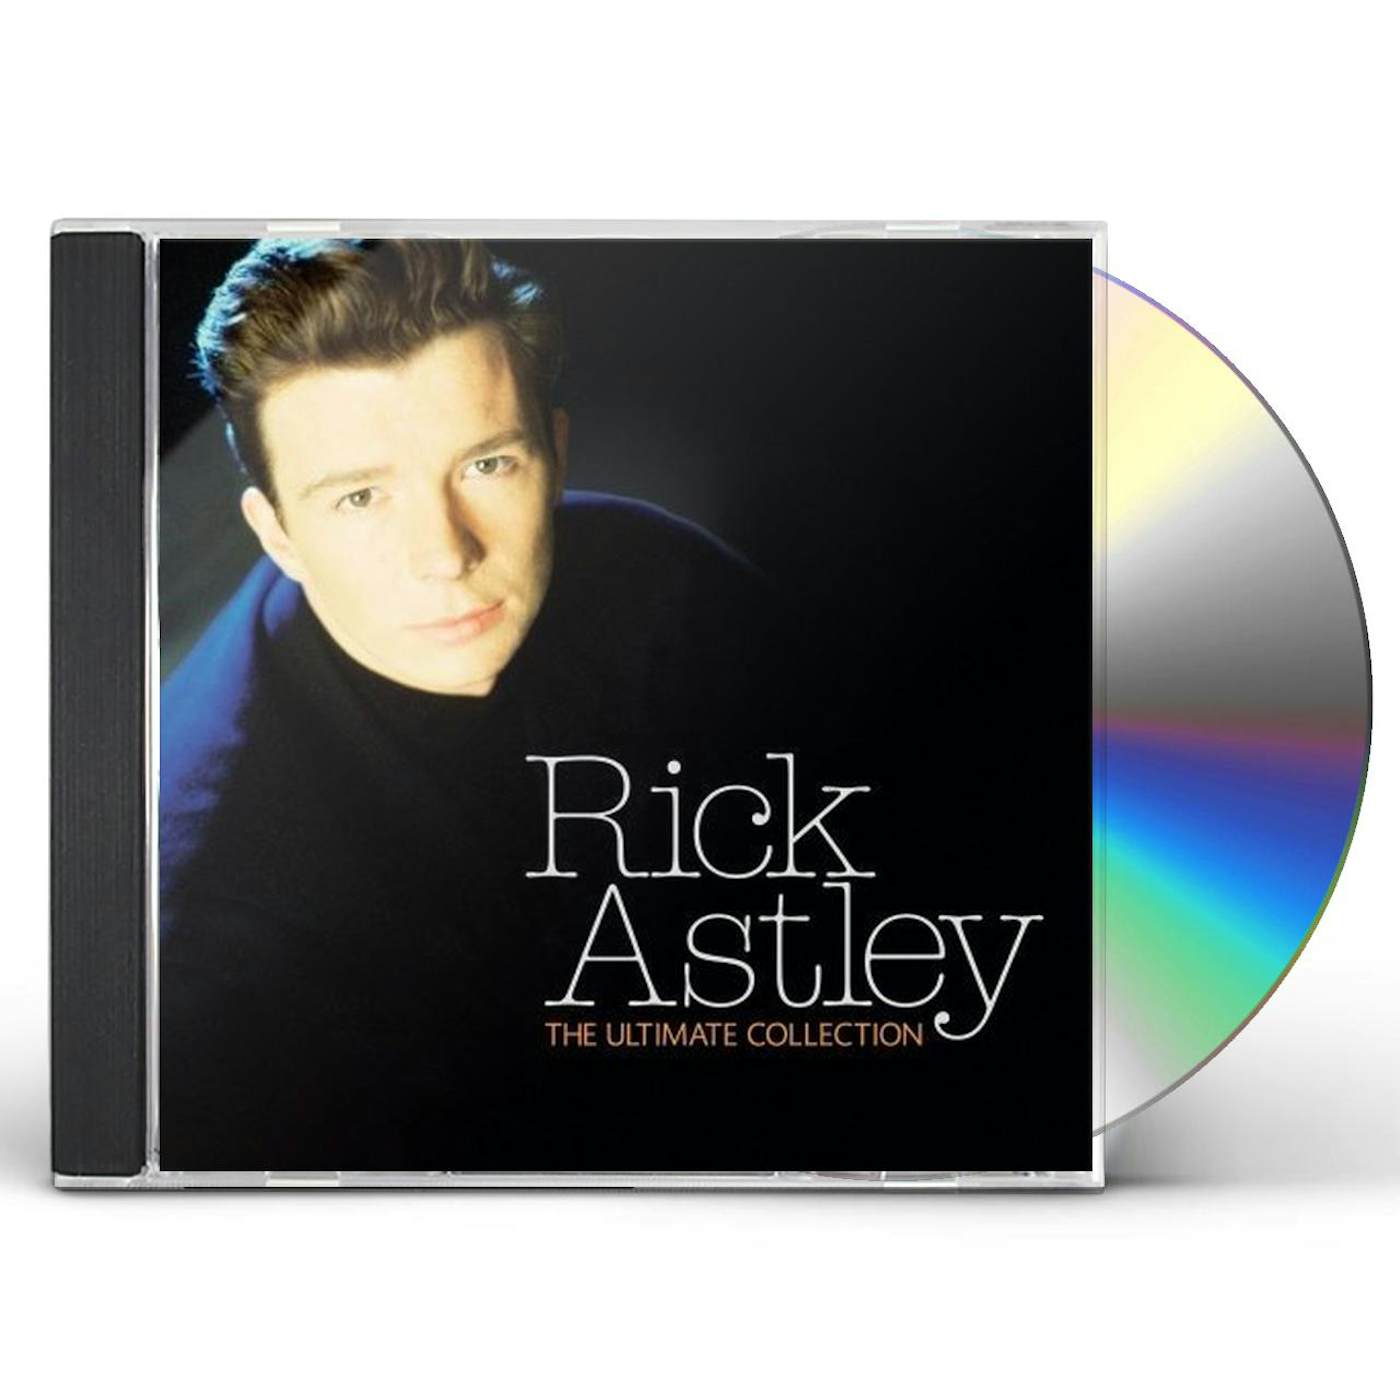 Rick Astley ULTIMATE COLLECTION CD